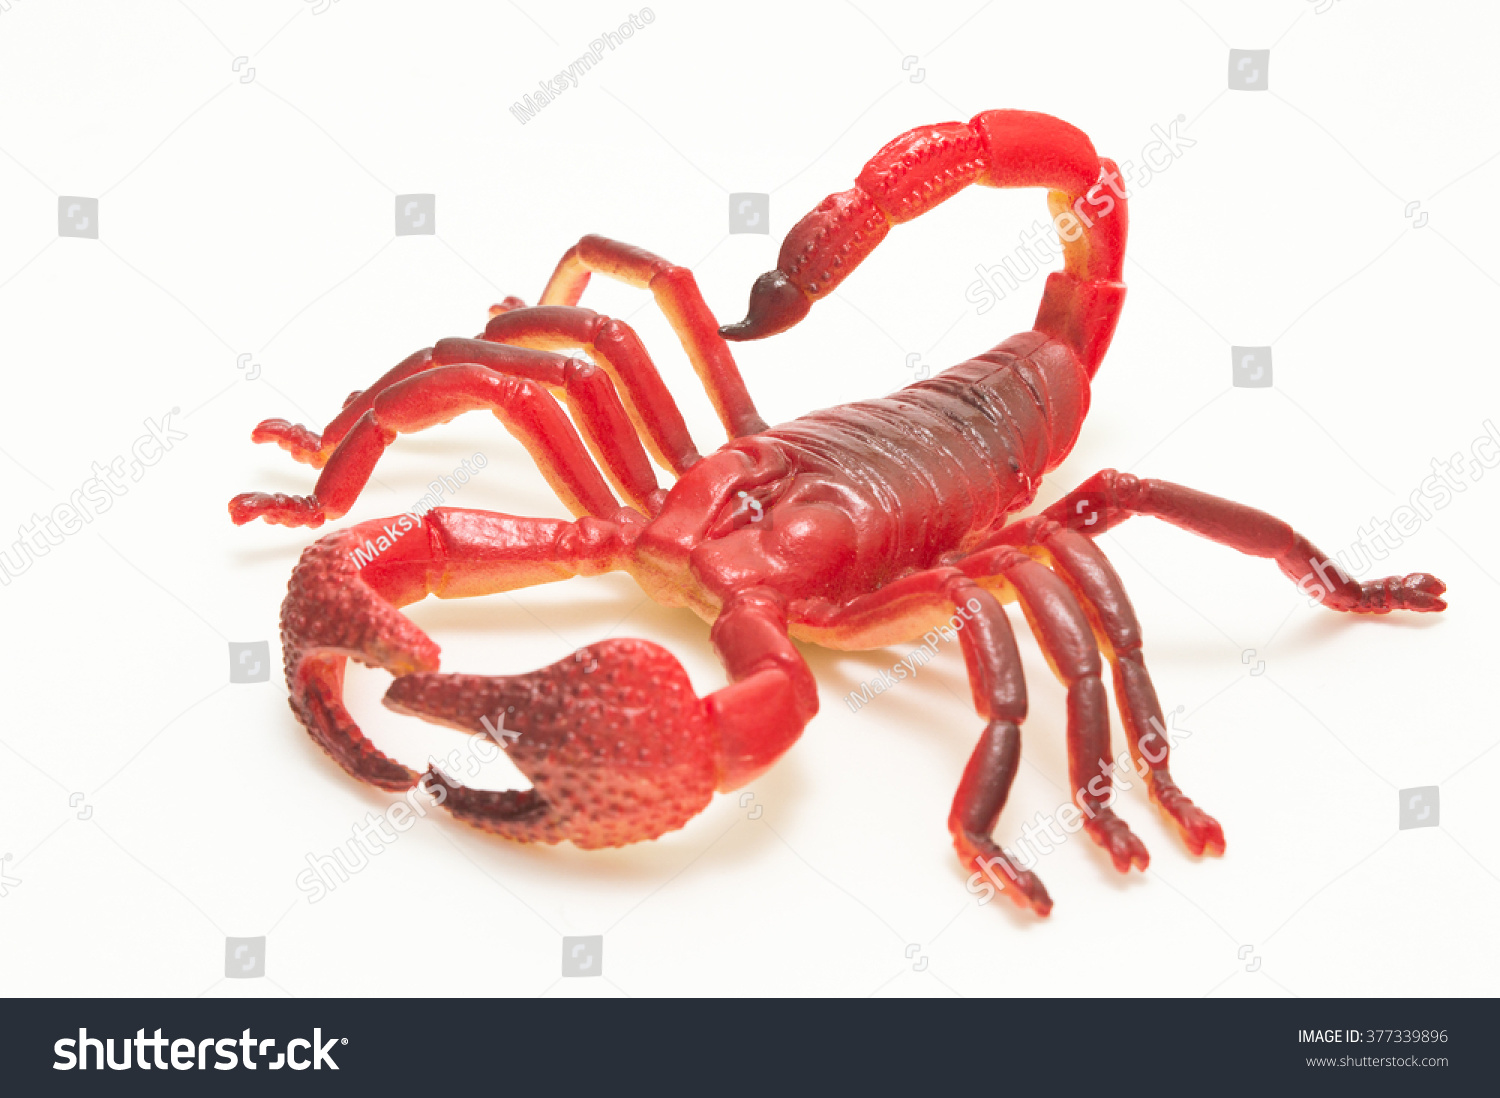 Red Plastic Scorpion Toy On White Stock Photo 377339896 | Shutterstock